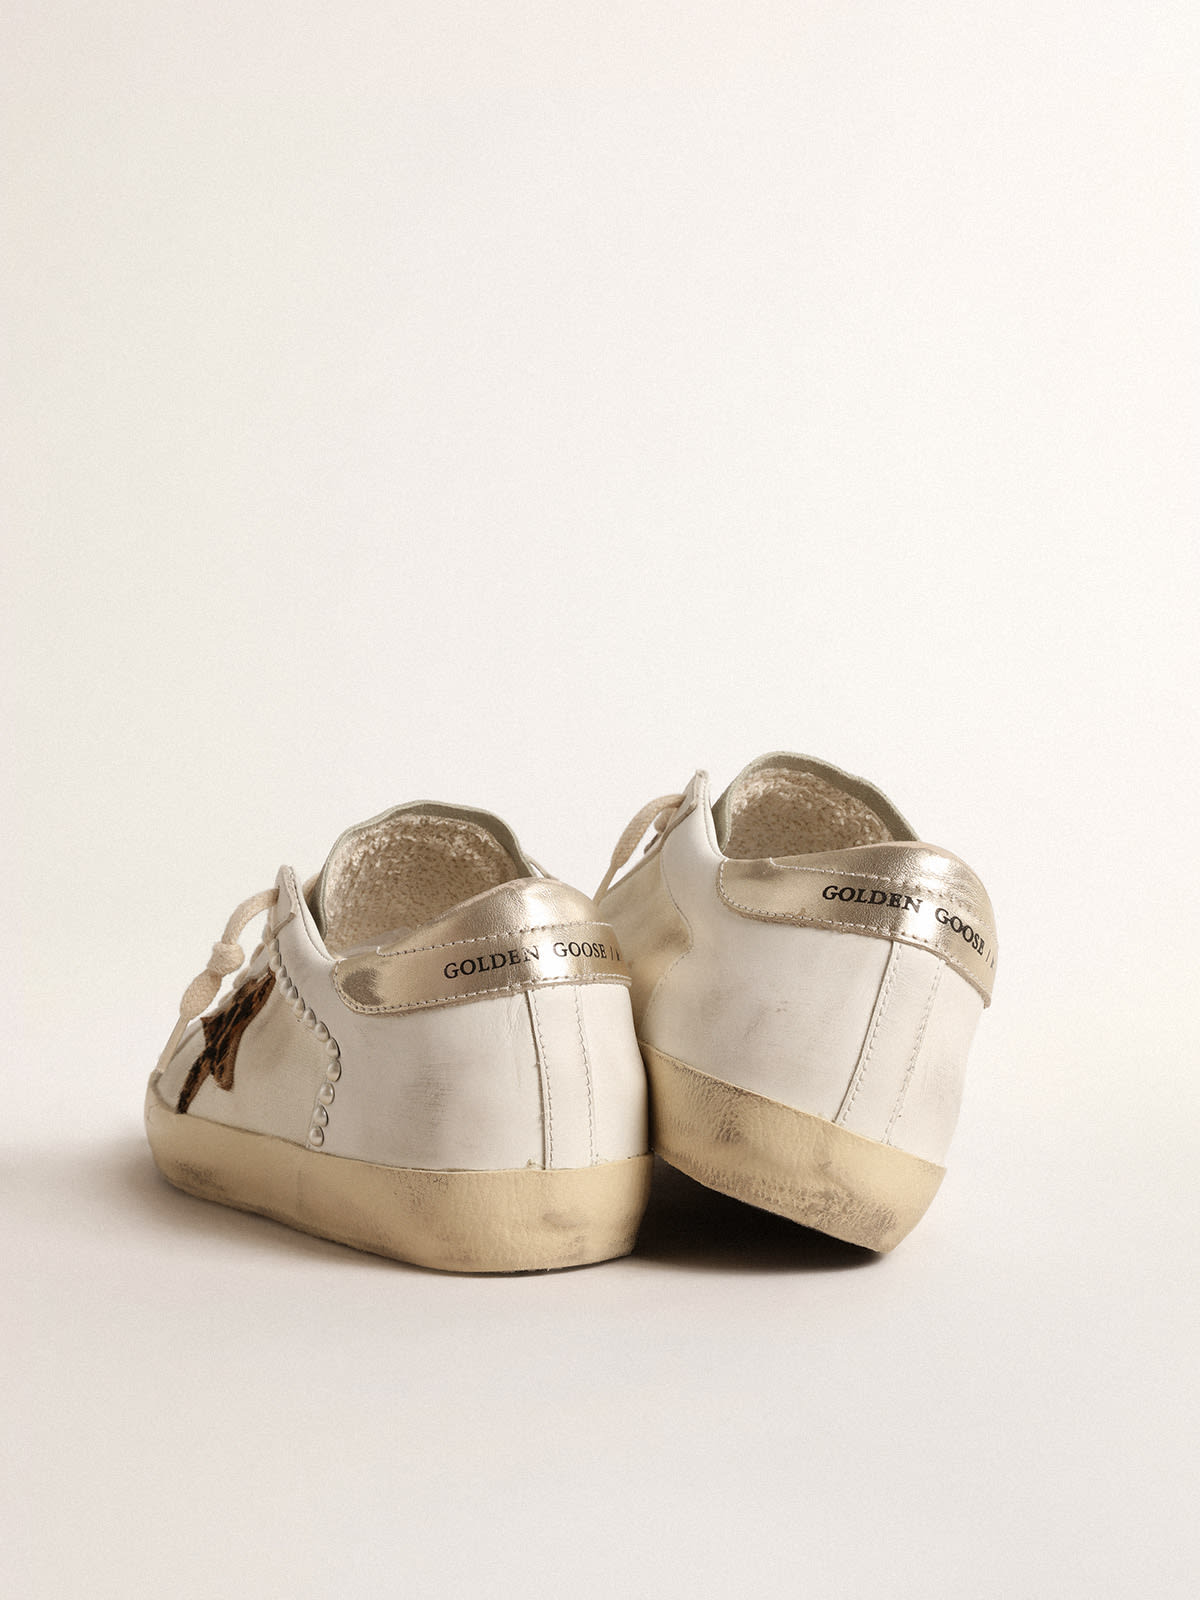 Golden Goose - Super-Star LTD in canvas and leather with leopard-print pony skin star in 